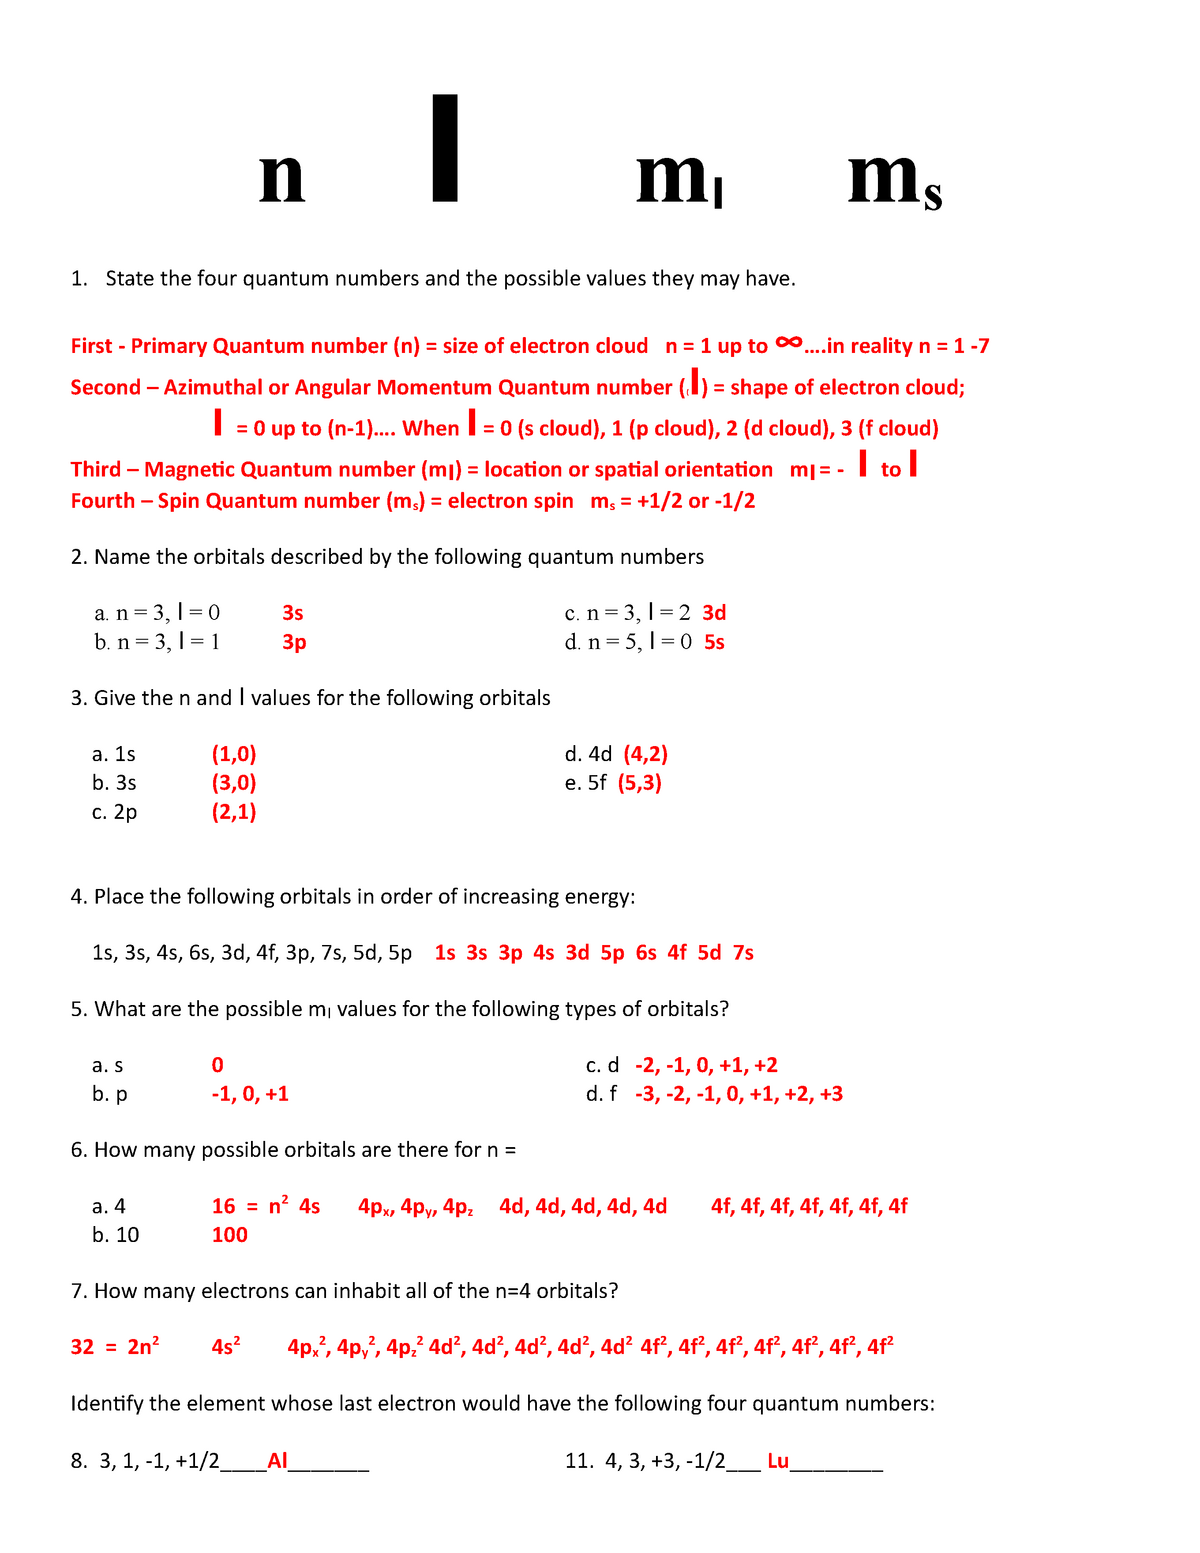 quantum-numbers-worksheet-answer-key-n-l-ml-ms-state-the-four-quantum-numbers-and-the-possible